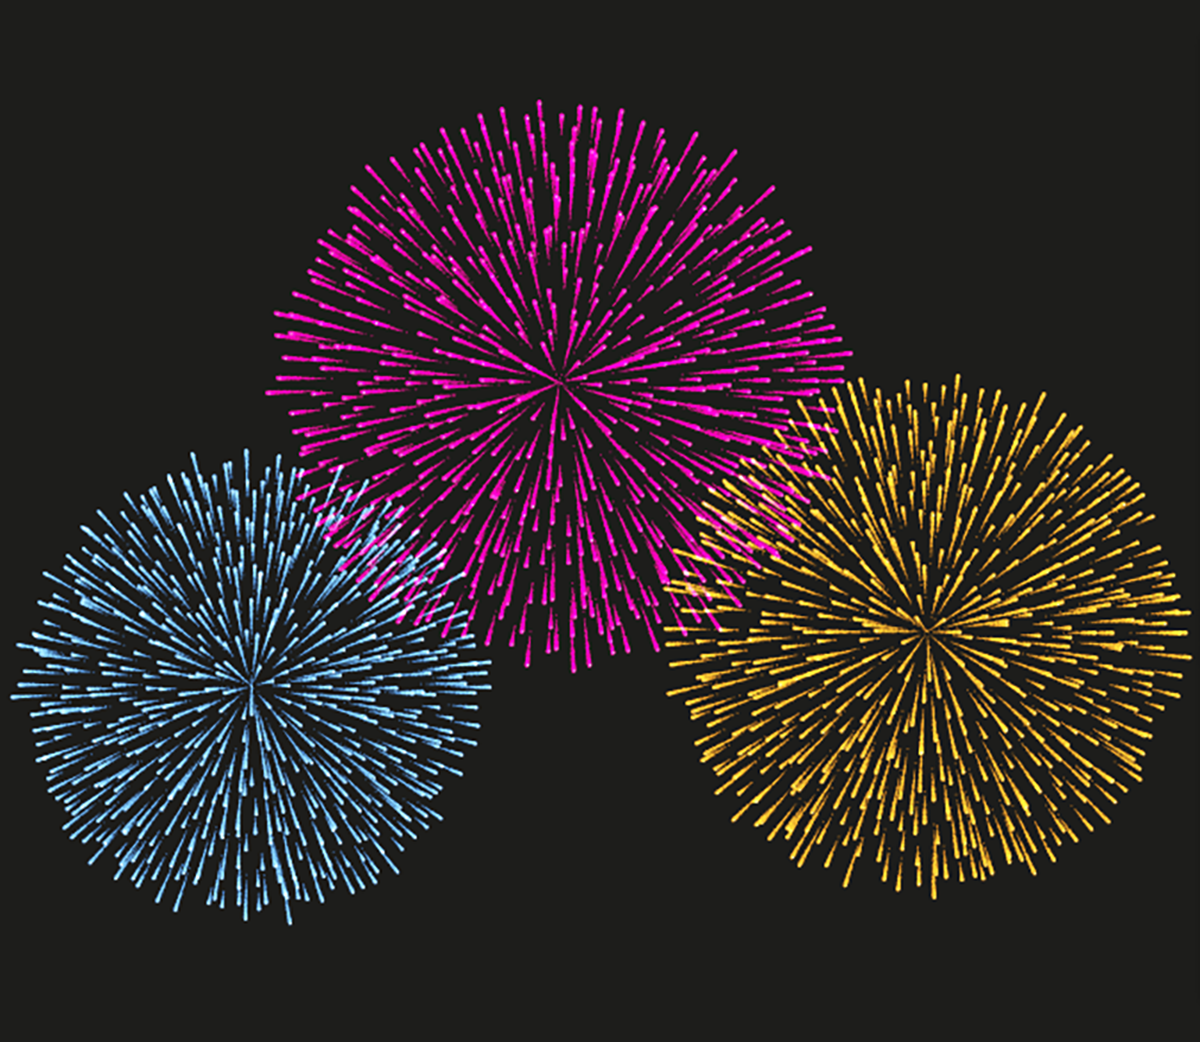 How to create festive fireworks with Stipplism and Illustrator